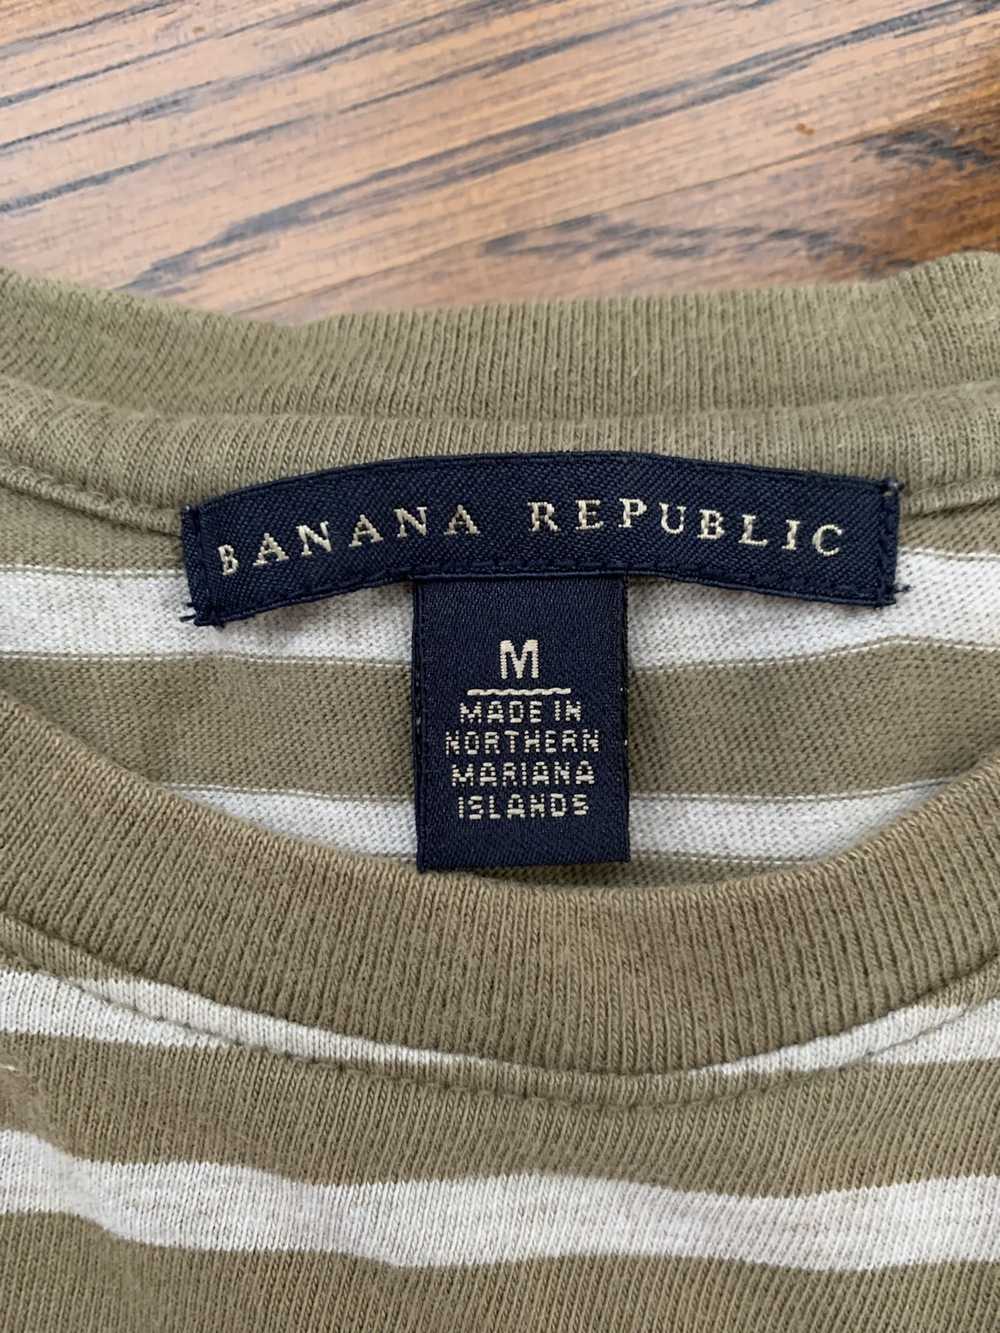 Banana Republic Olive/gray striped T-shirt from BR - image 3